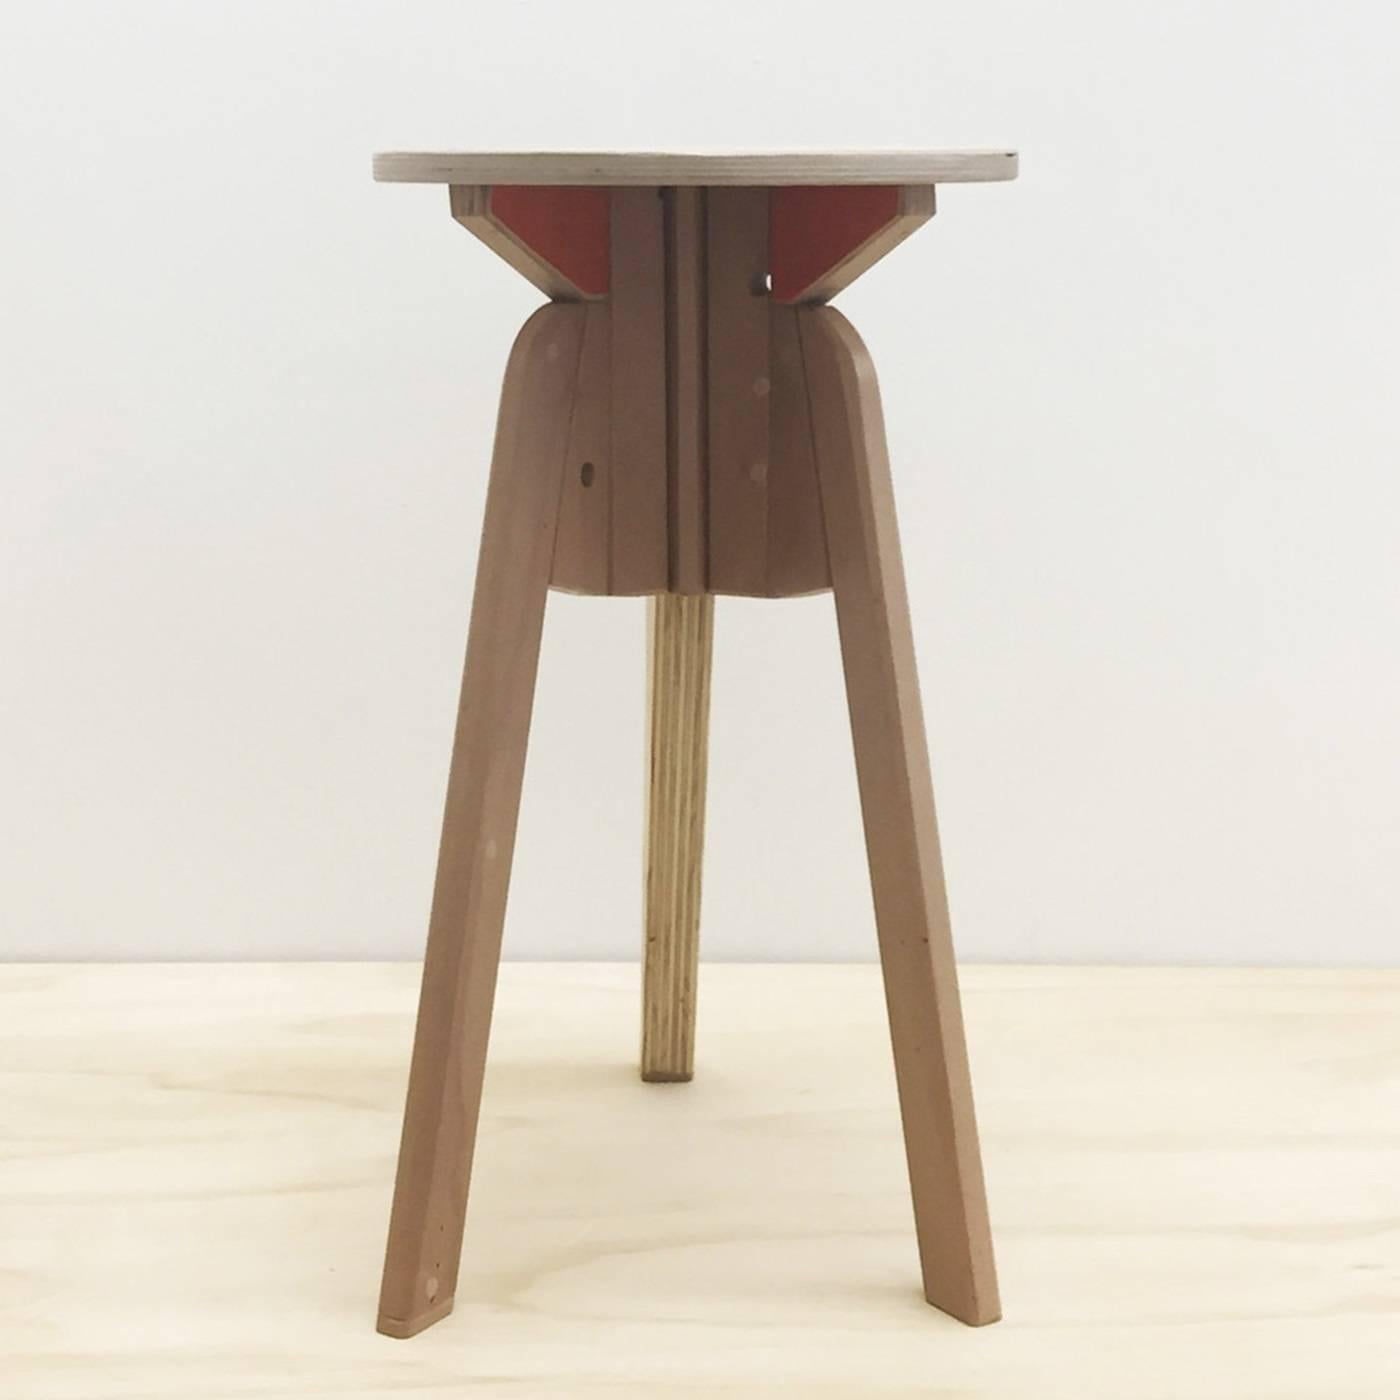 Part of the LW series, this striking stool is made in larch wood and solid wenge wood with a triangular top in multi-layer birch wood that is pierced in the centre by a triangular hole. This decoration mirrors a bottom element also in the same